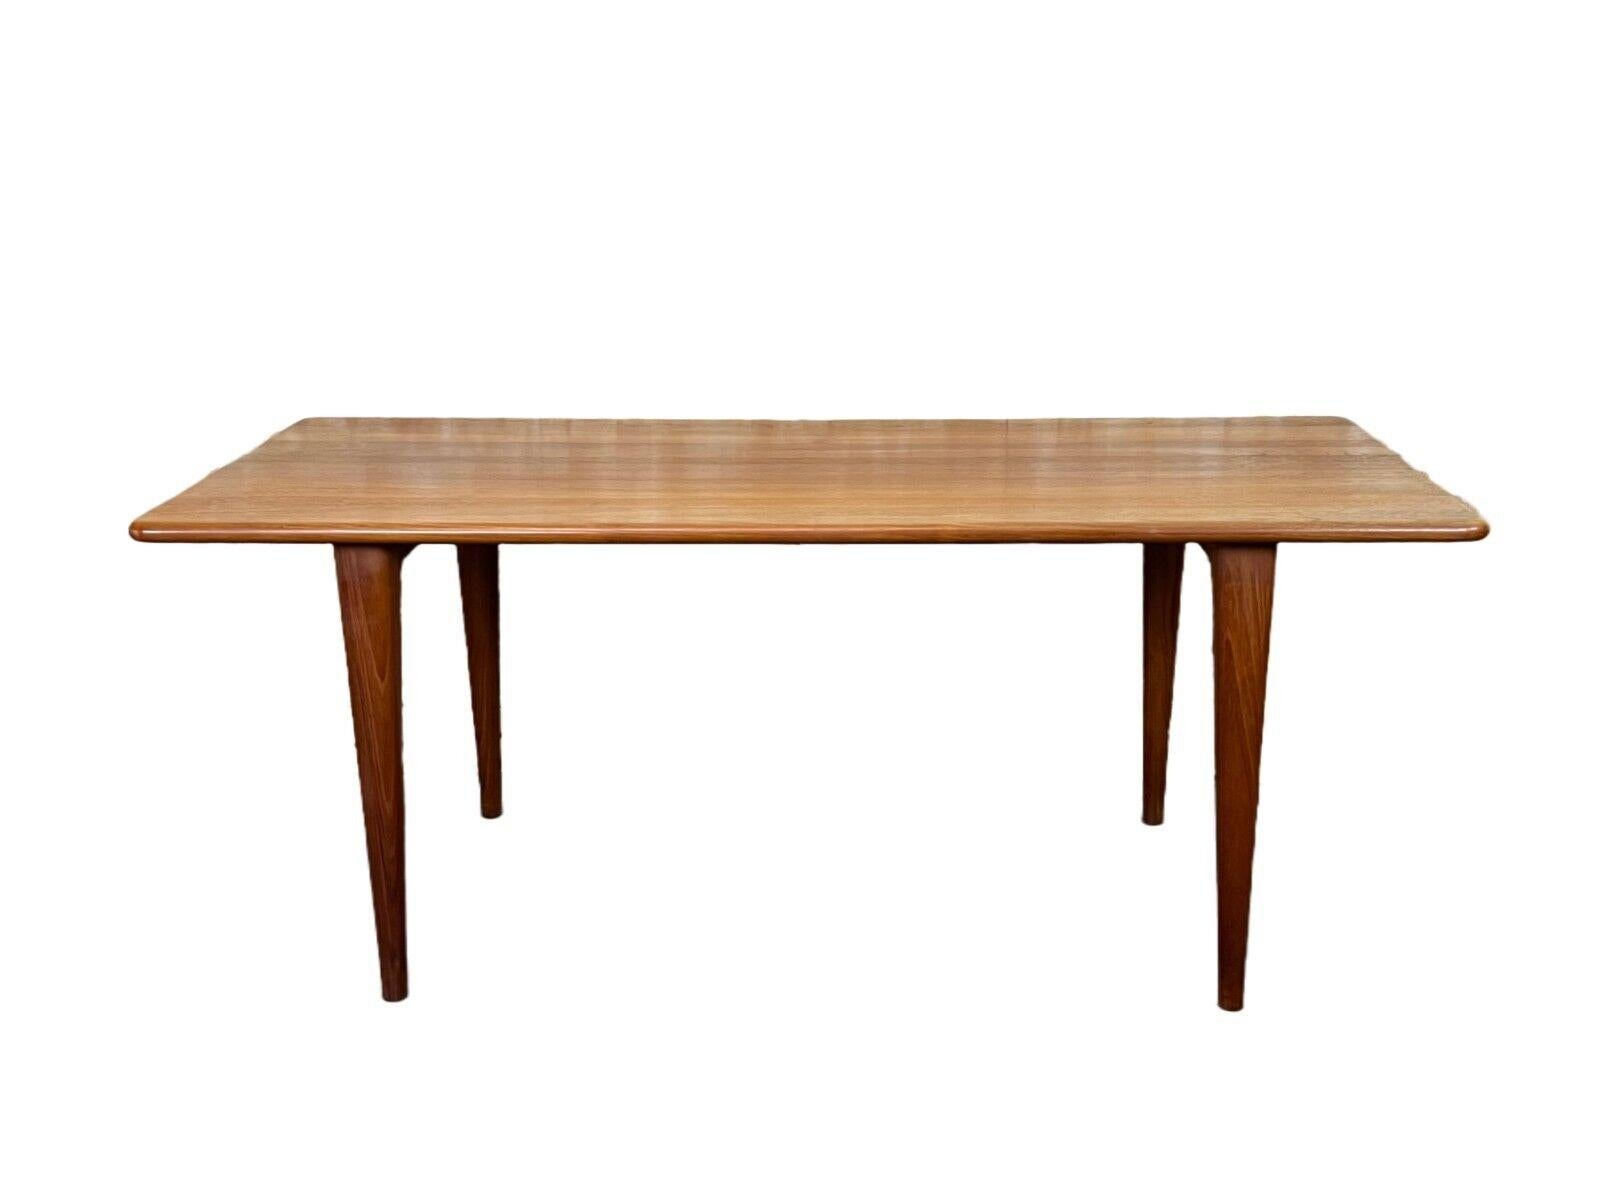 1960s 1970s teak table coffee table Danish Modern Design Denmark

Object: coffee table

Manufacturer:

Condition: good

Age: around 1960-1970

Dimensions:

Width = 134cm
Depth = 62.5cm
Height = 53.5cm

Other notes:

The pictures